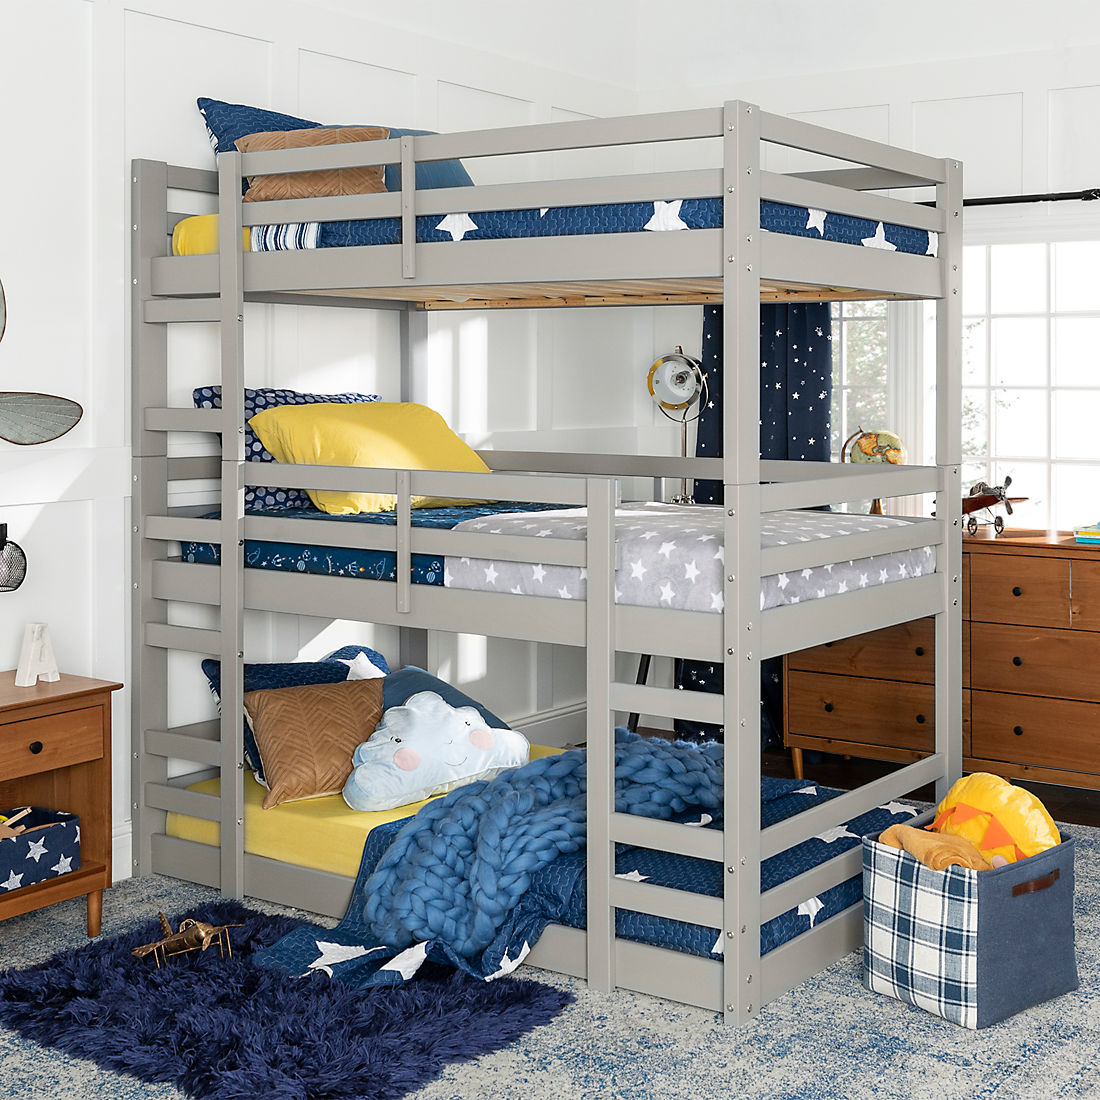 W Trends Solid Wood Triple Bunk Bed, Bjs Bunk Bed With Trundle